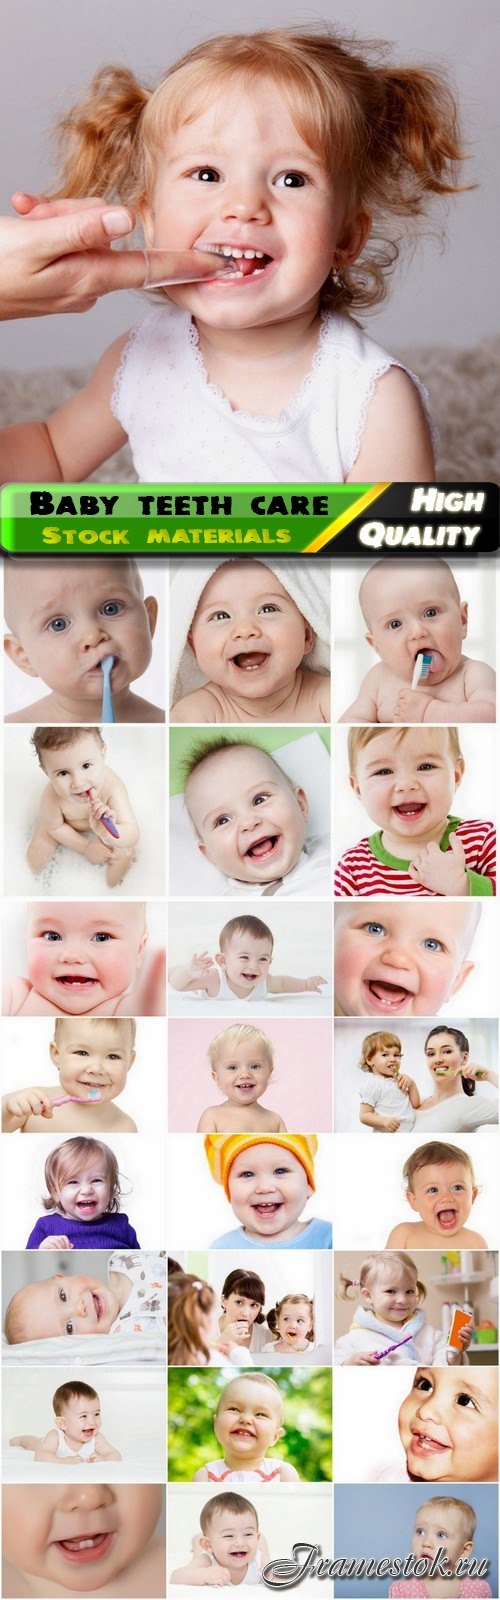 Smiling little baby and teeth care - 25 HQ Jpg